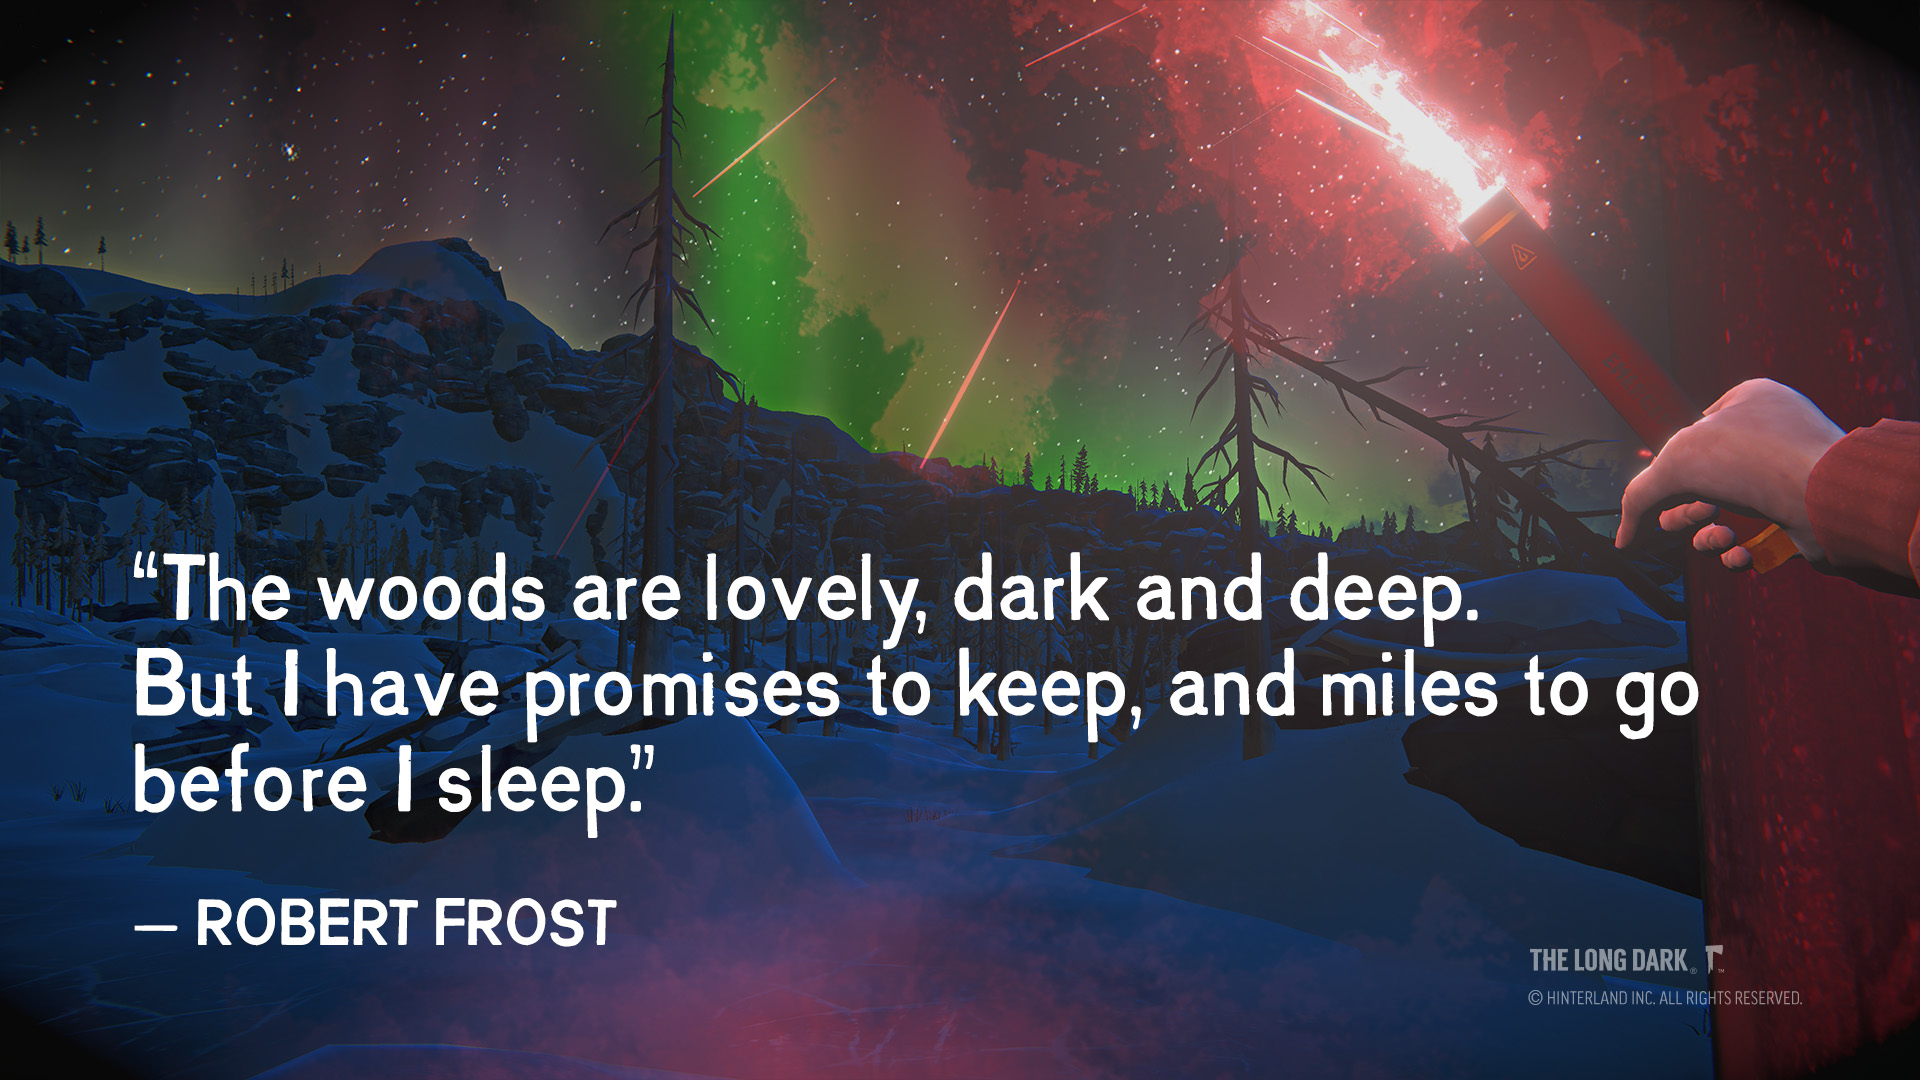 The Long Dark on Twitter: '“The woods are lovely, dark and deep. But I have  promises to keep, and miles to go before I sleep.” - #RobertFrost  #WisdomWednesday #TheLongDark https://t.co/2V4XMHlzGH' / Twitter